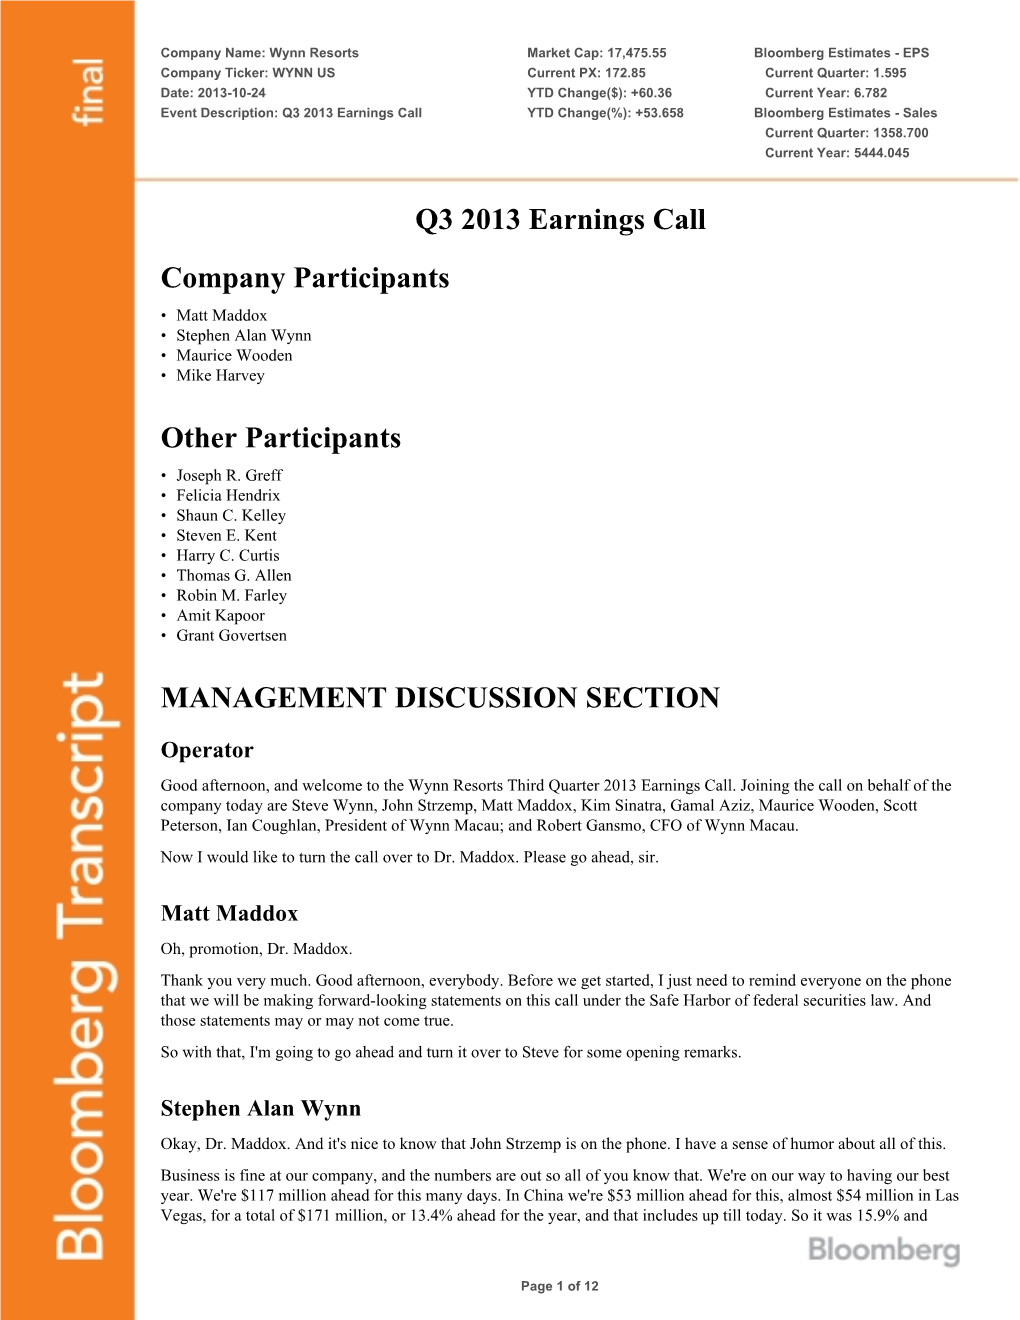 Q3 2013 Earnings Call YTD Change(%): +53.658 Bloomberg Estimates - Sales Current Quarter: 1358.700 Current Year: 5444.045